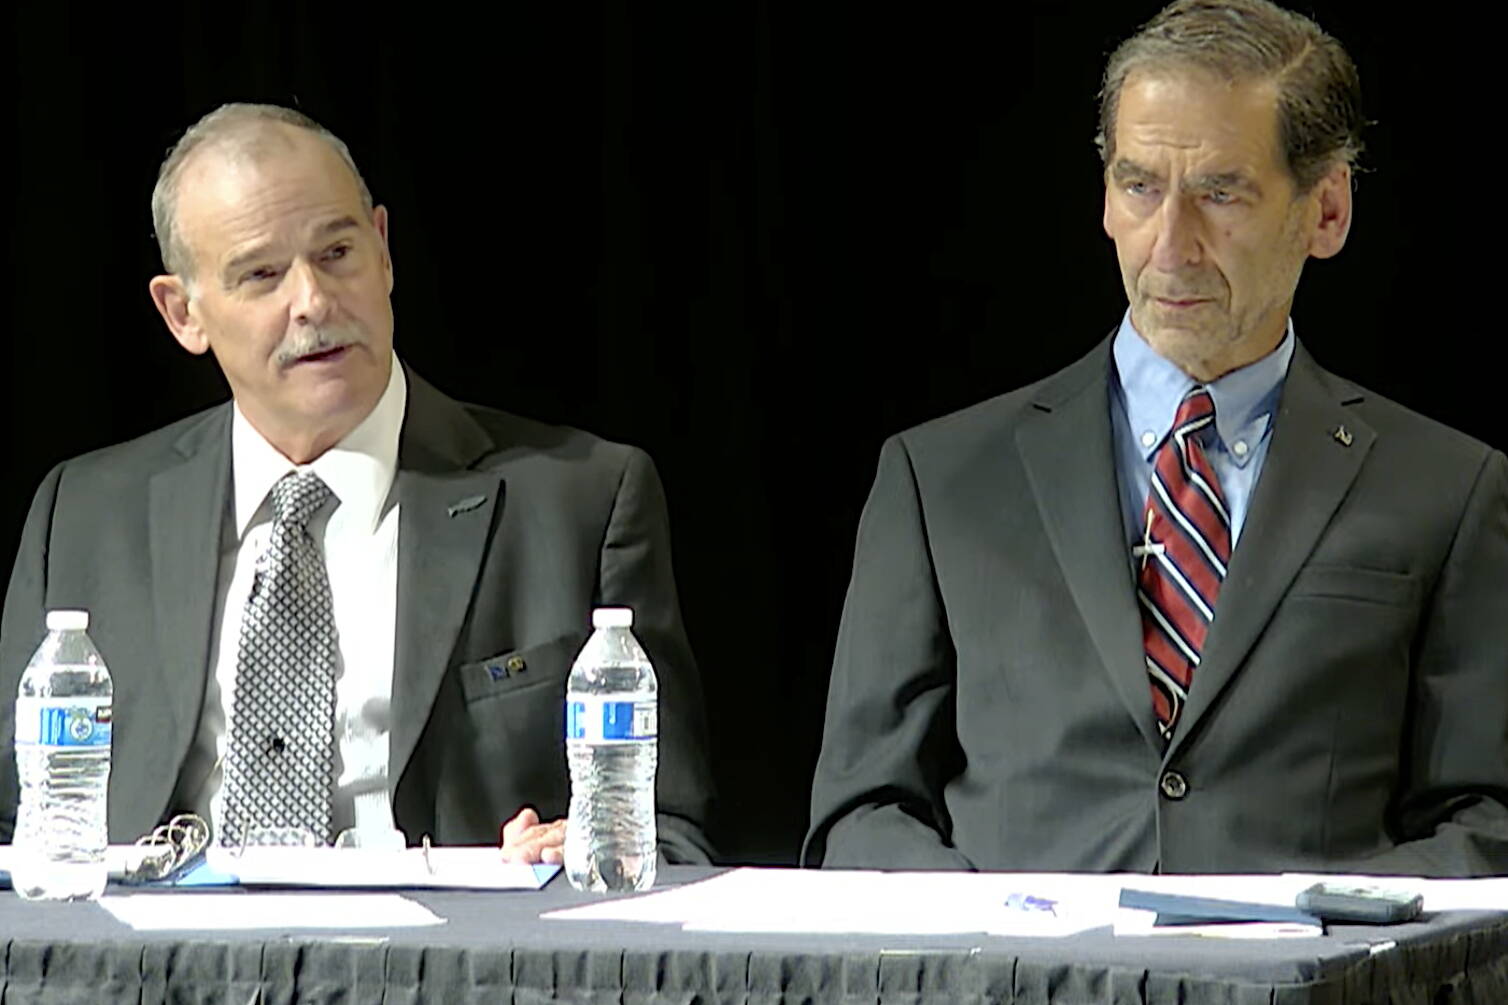 Screenshot / Alaska Public Media’s YouTube channel 
Bob Bird, left, chairman of the Alaskan Independence Party, and former Lt. Gov. Loren Leman make the case in favor of a state constitutional convention during a debate in Anchorage broadcast Thursday by Alaska Public Media.